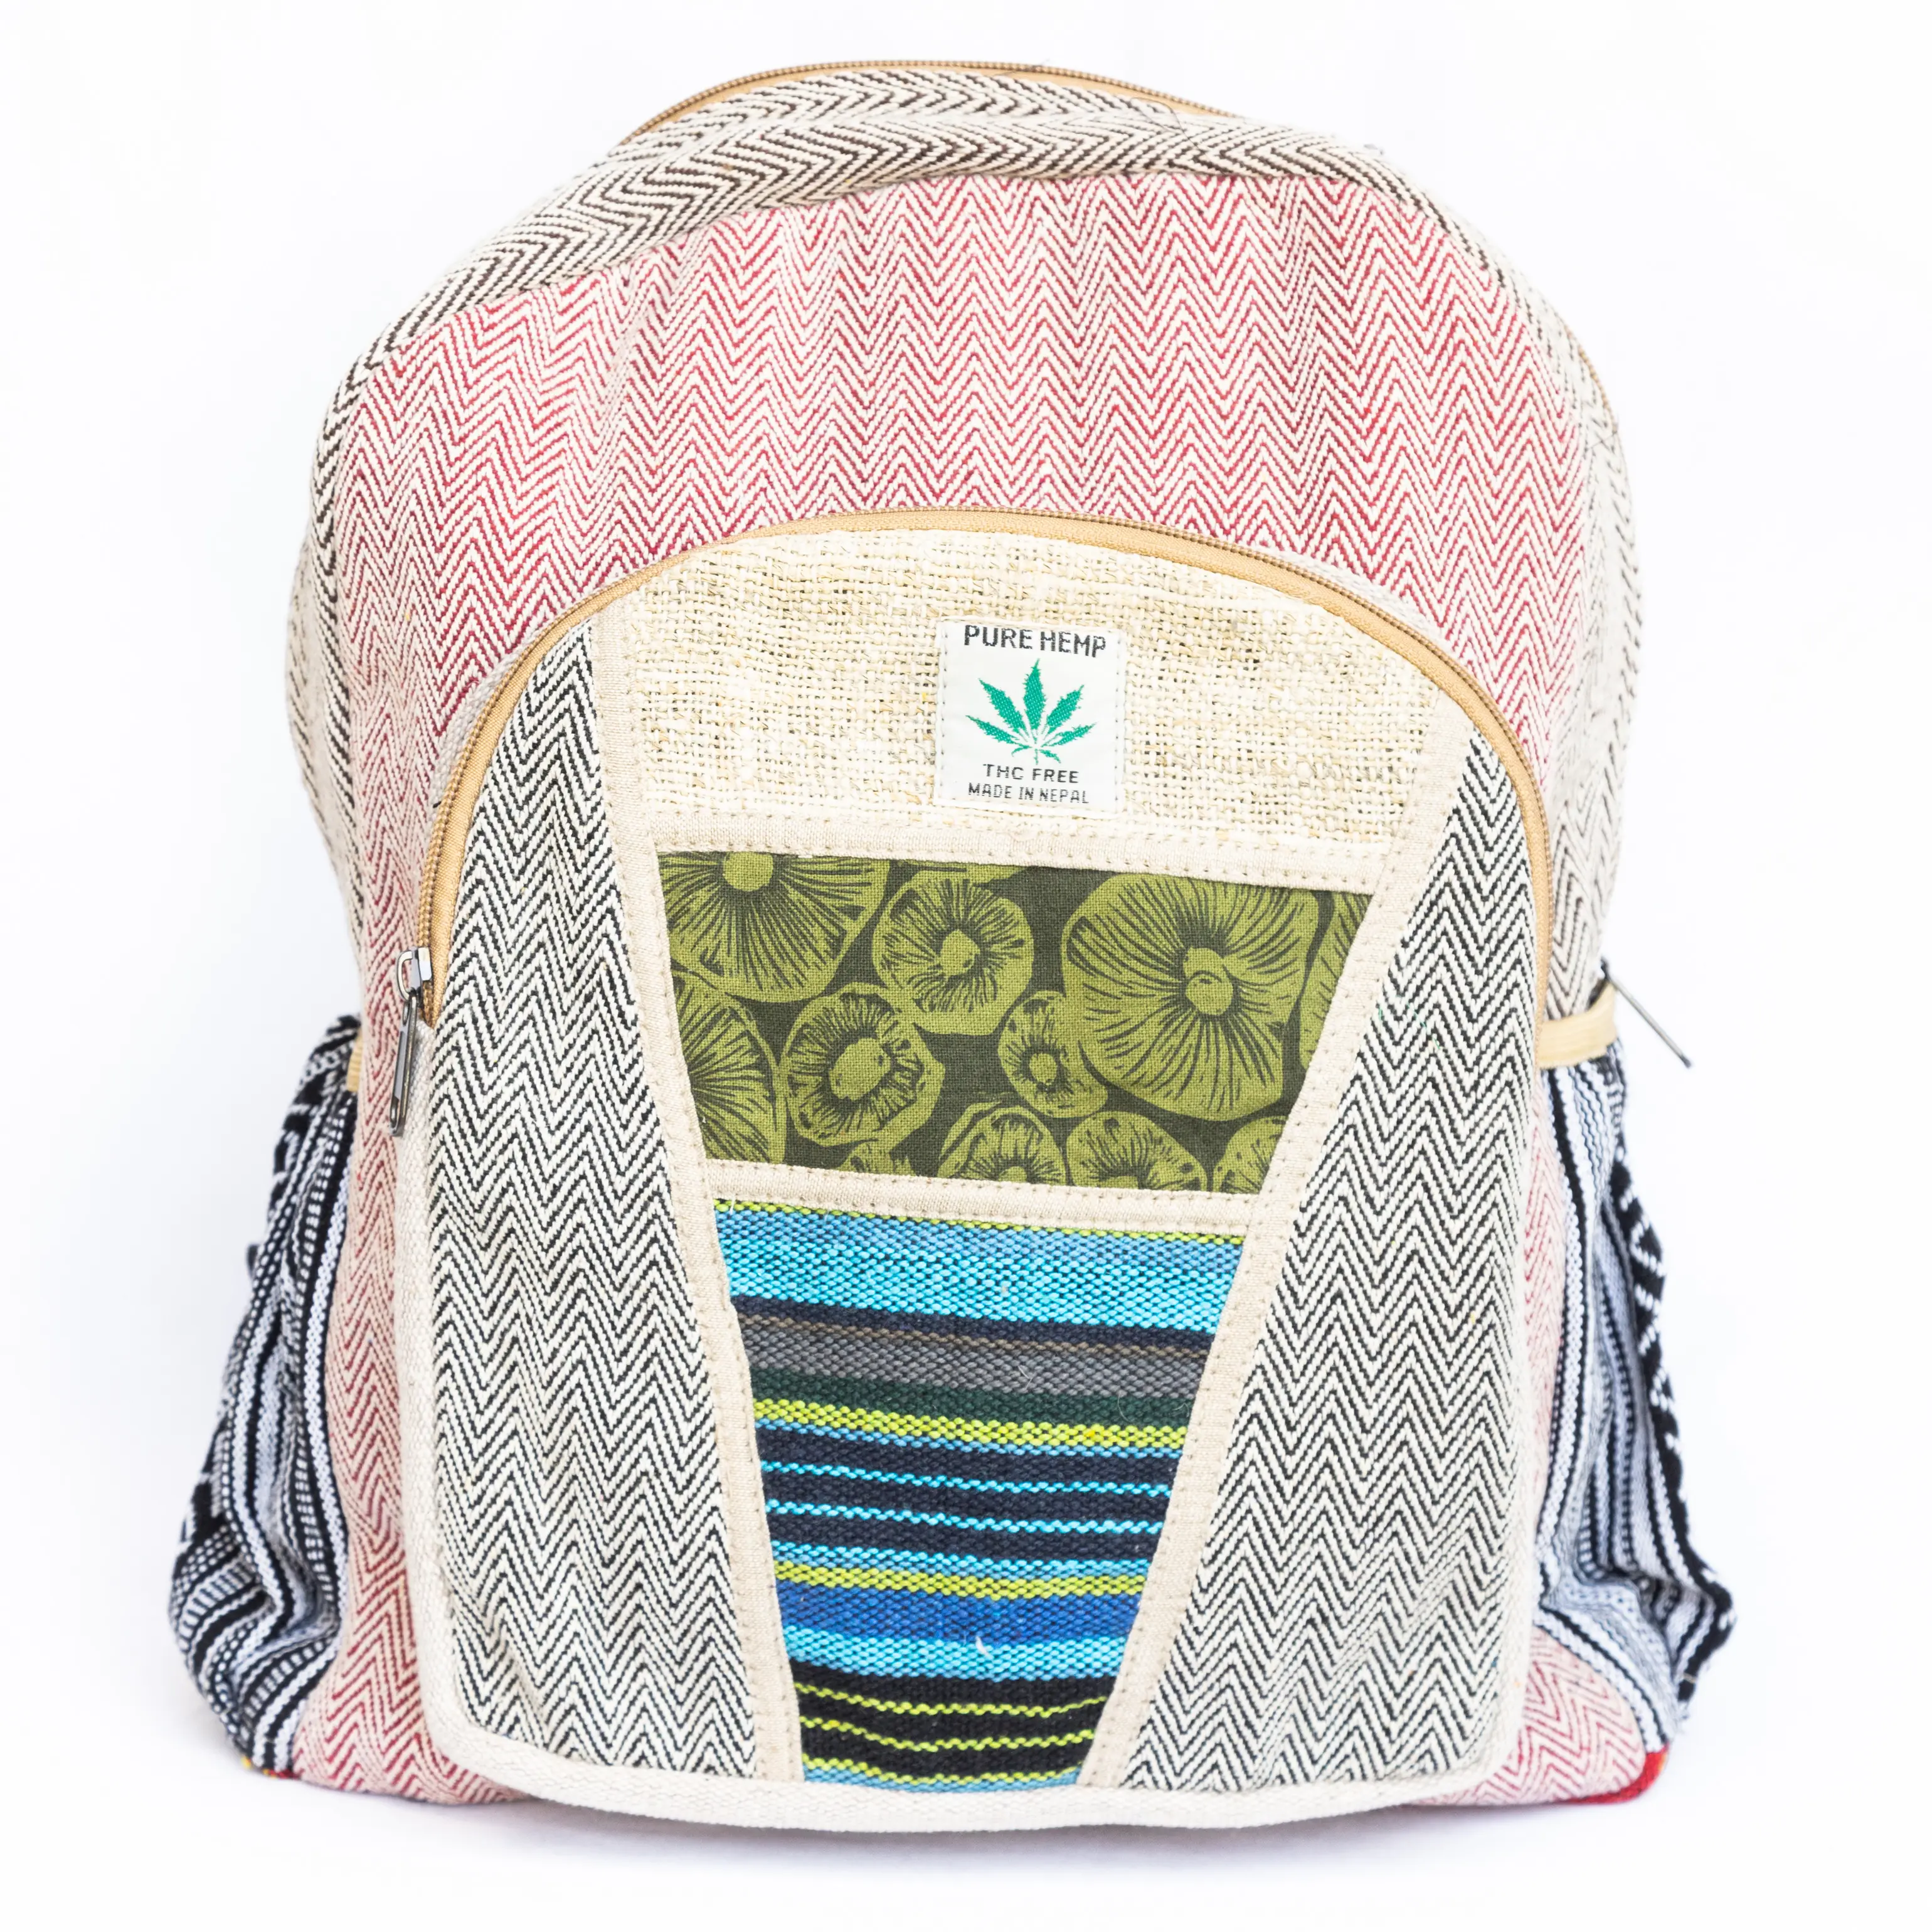 Mini Handmade Hemp Backpack from Nepal Sustainable School and College Shoulder Bag